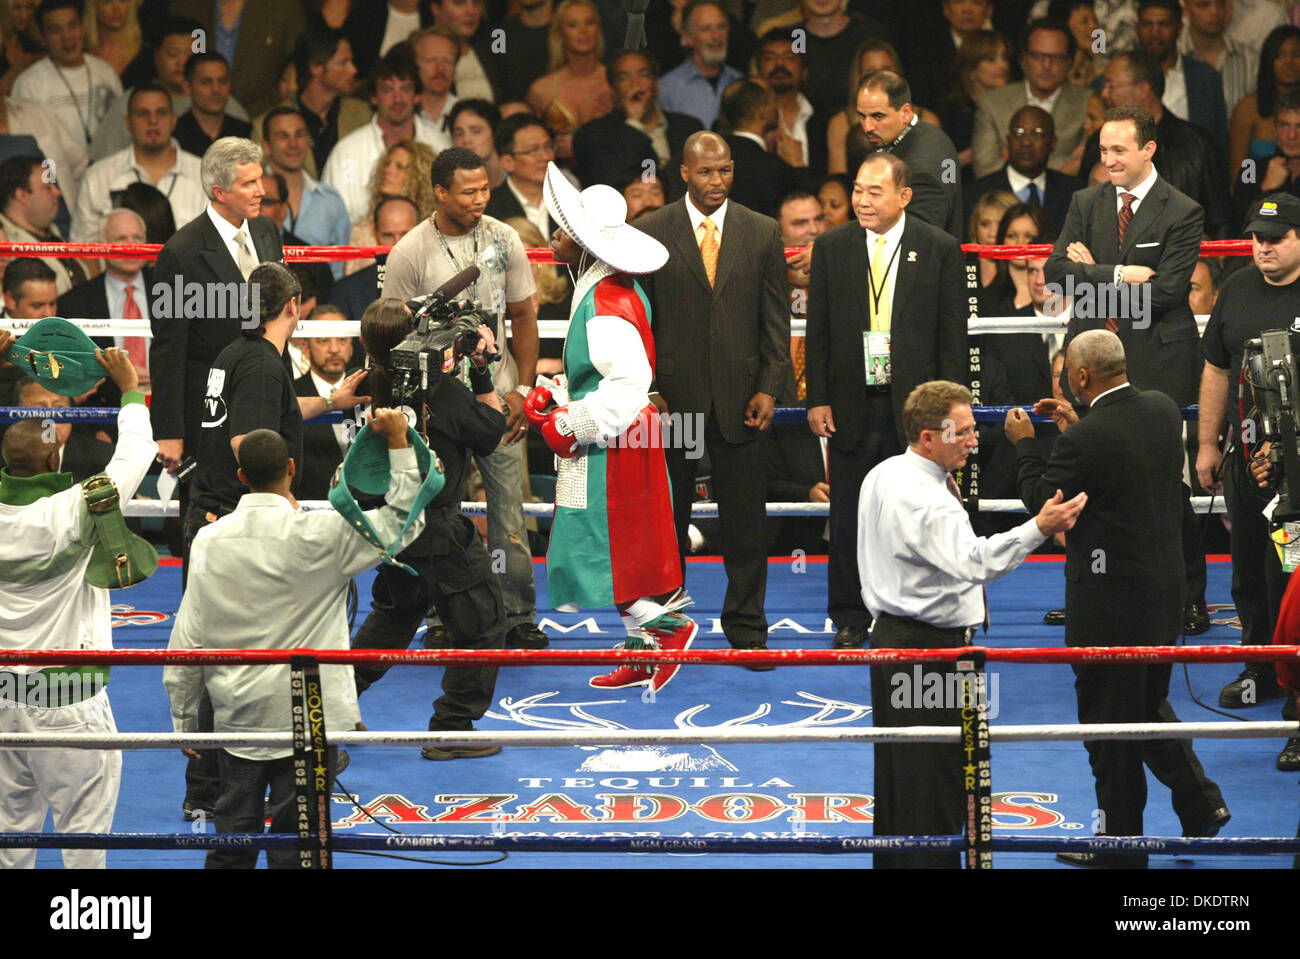 May 05, 2007 - Las Vegas, NV, USA - Boxer FLOYD MAYWEATHER enters the ring in dressed in Mexican colors for Cinco De Mayo at The MGM Grand  Garden Arena in the MGM Hotel & Casino in LasVegas, Nevada. 'Pretty Boy' FLOYD MAYWEATHER defeated 'Golden Boy' OSCAR DE LA HOYA in a controversial split decison but the Compu Box Stats supported the decision. (Credit Image: © Mary Ann Owen/ZUM Stock Photo